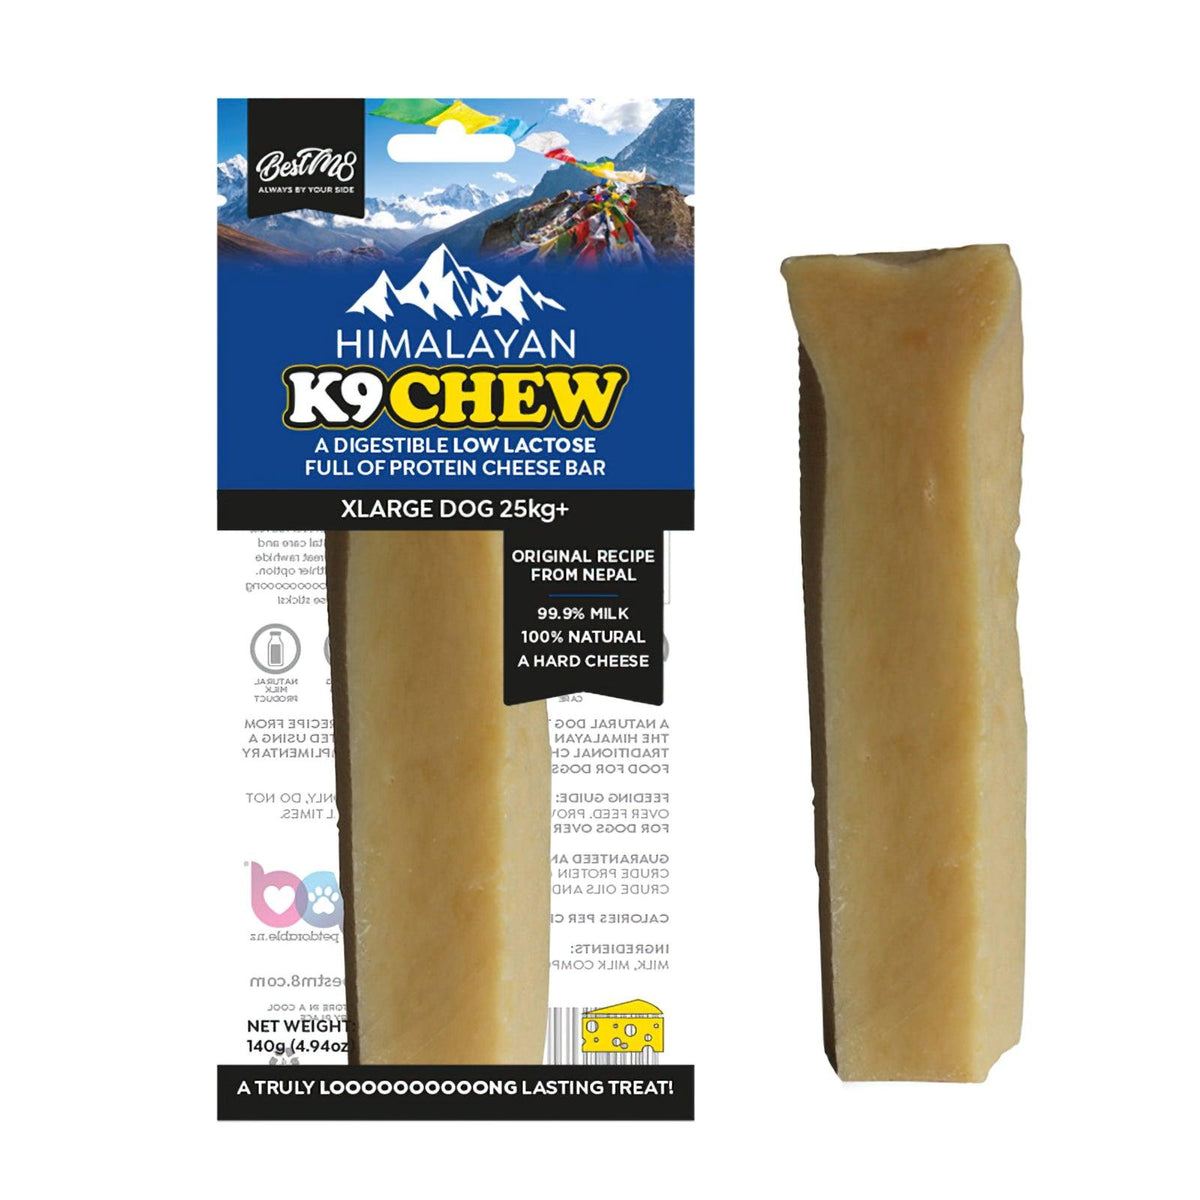 BestM8 Himalayan K9Chew - Long-Lasting Natural Dog Treat for Extra Large Dogs (25kg+) - PAWS CLUB